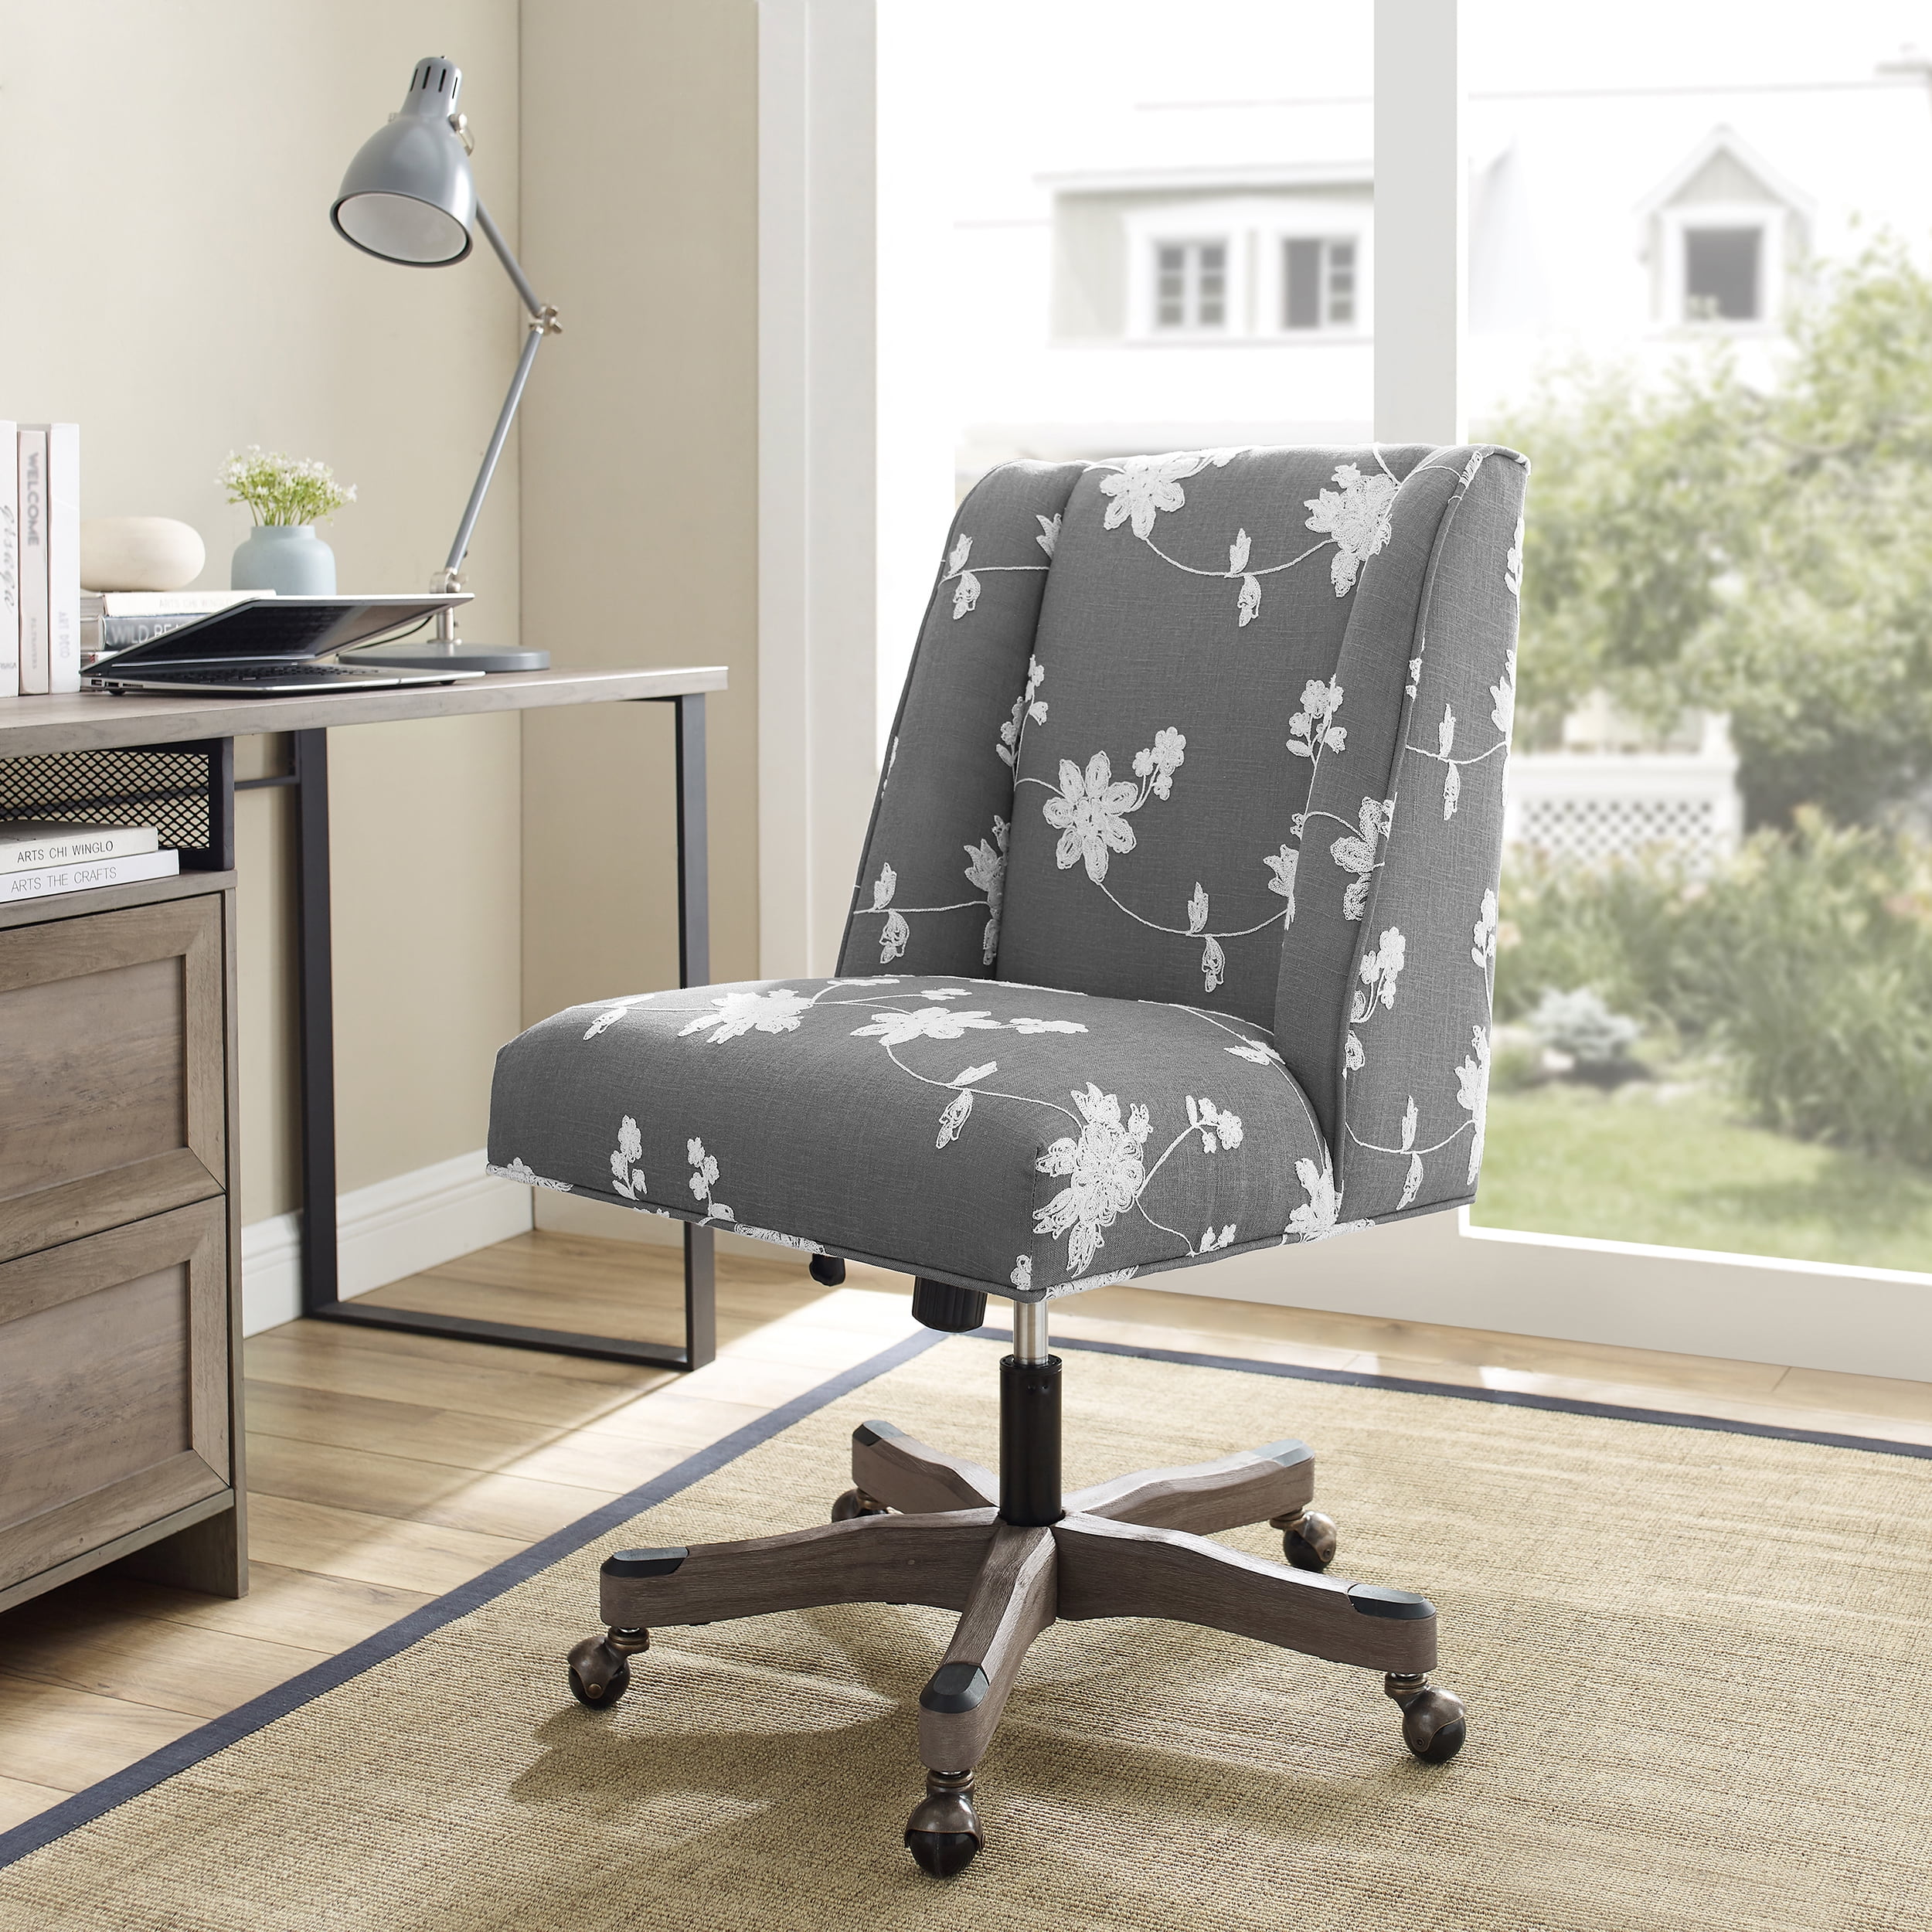 Furniliving Modern Padded Office Chair Linen Fabric Home Office Desk Chair  Height Adjustable Computer Task Chair, DarkGrey